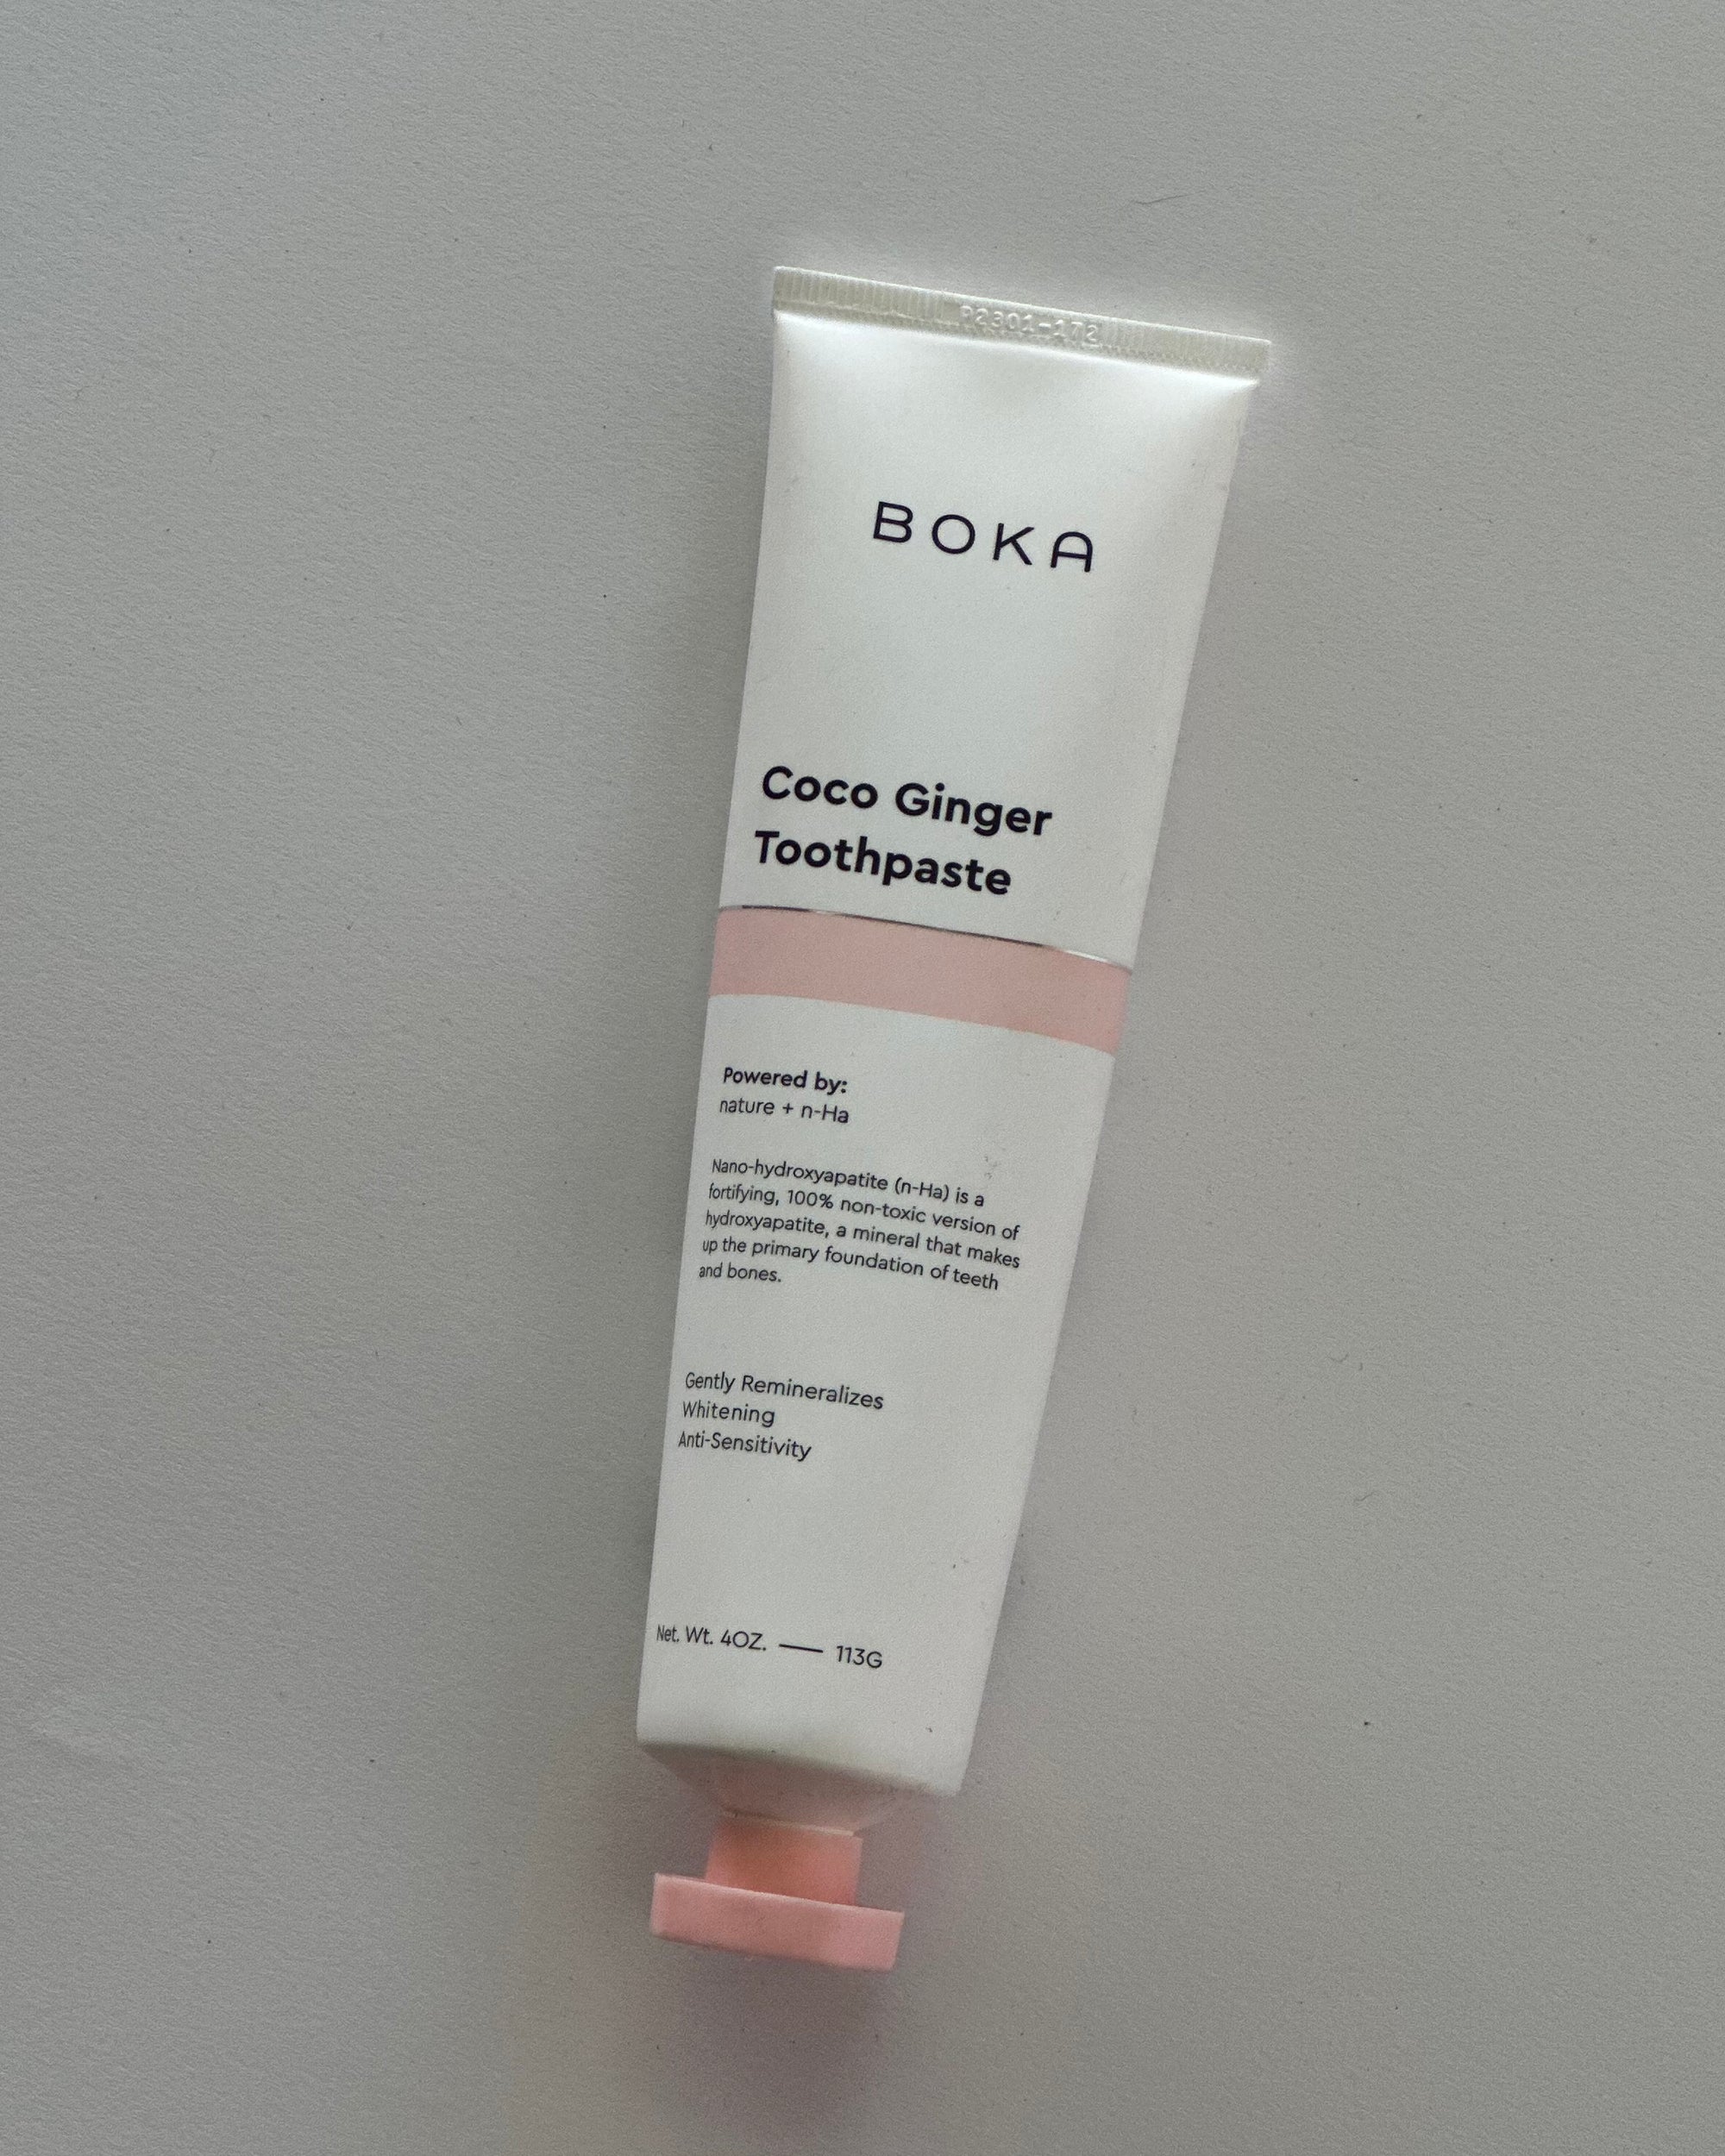 Coco Ginger Toothpaste